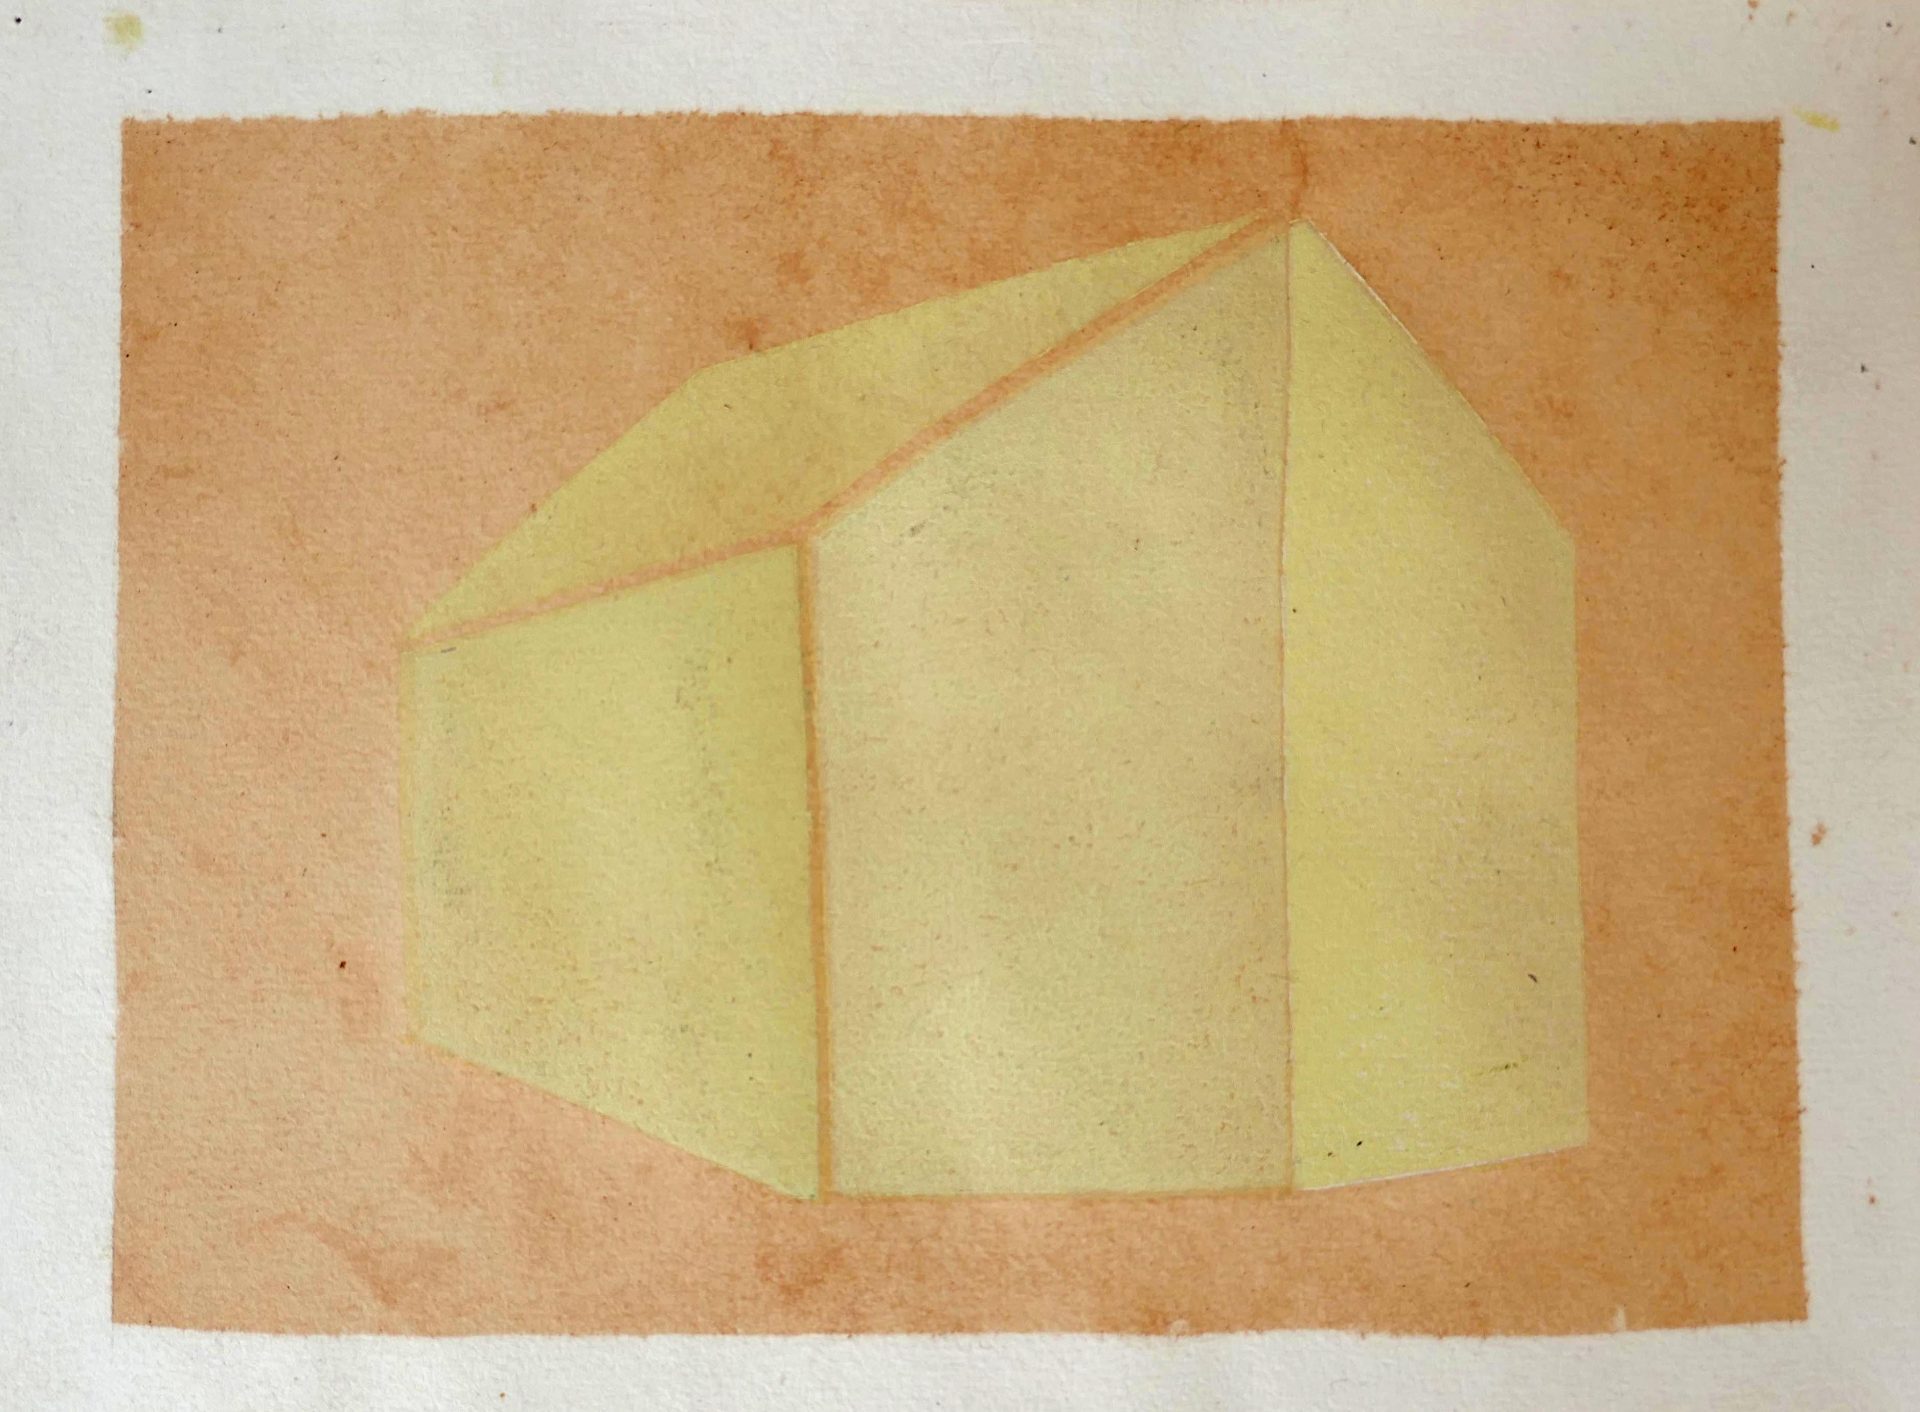 Architecture végétale 5, 2020, monotype on dyed paper (walnut leaves), image size 13,4x18,4 cm, paper size 17,3x22 cm, edition of 1jpg